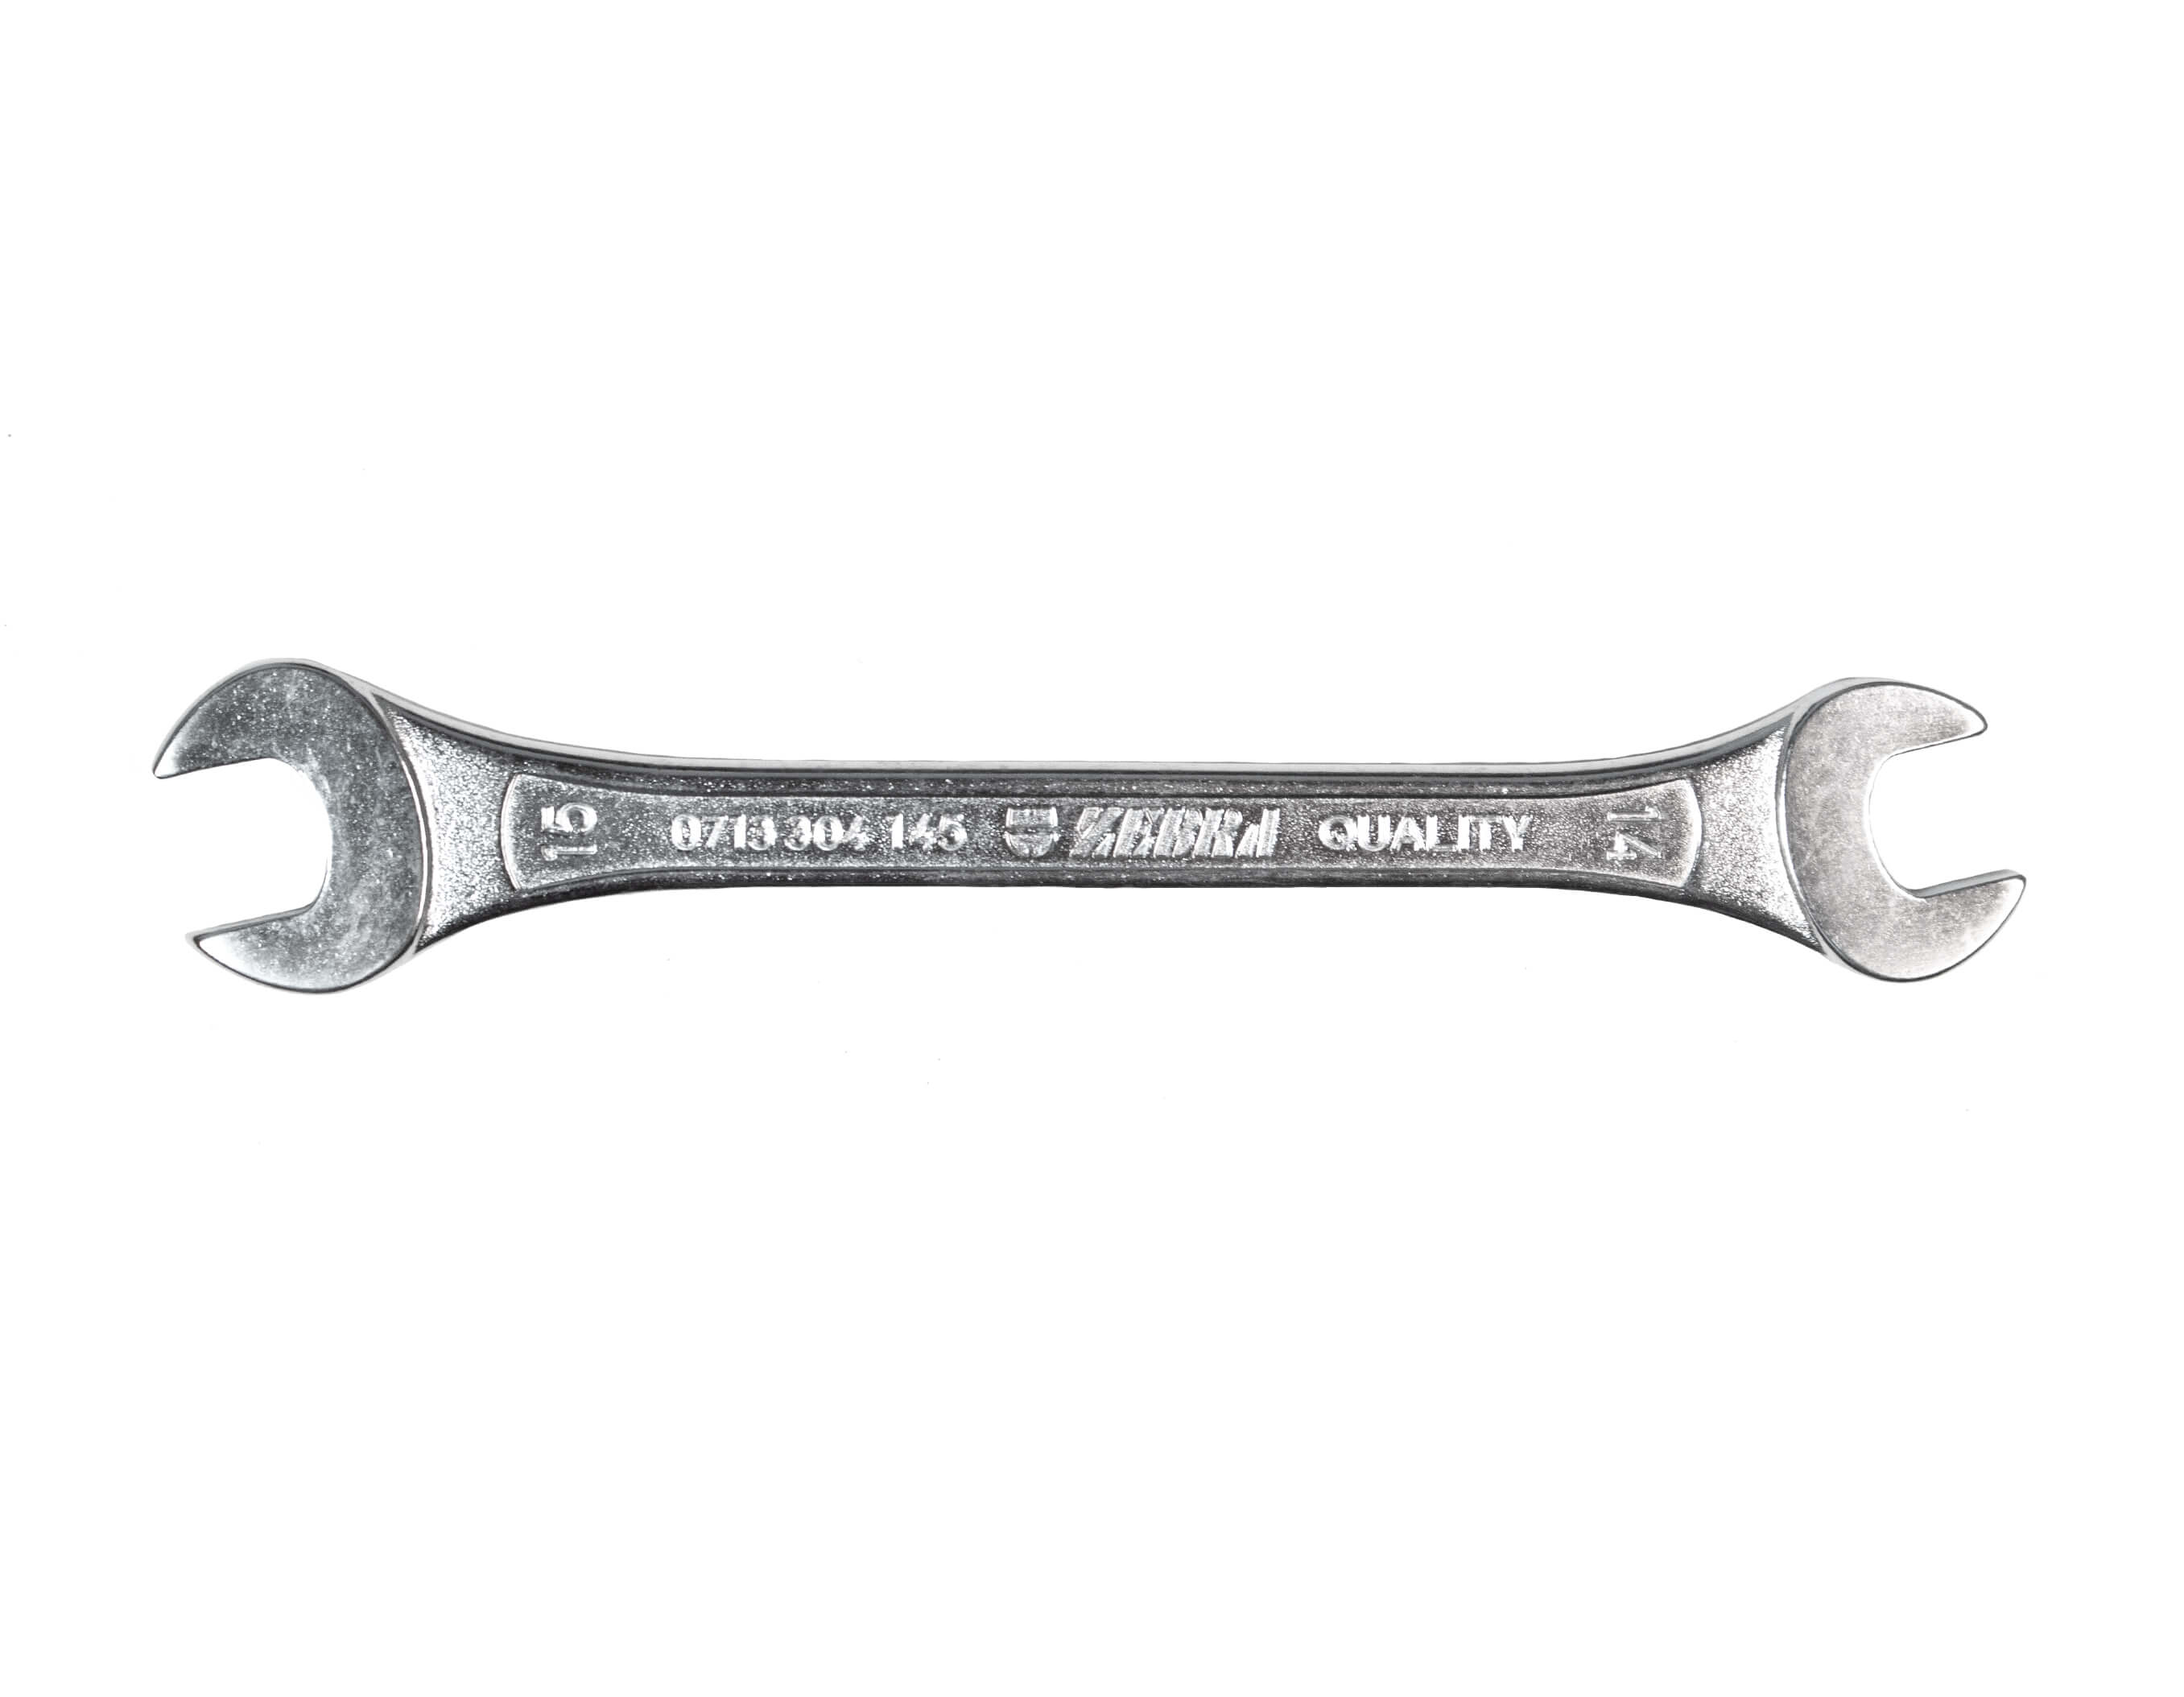 Double open-end wrench ISO 1085 OFFSET-WS14X15